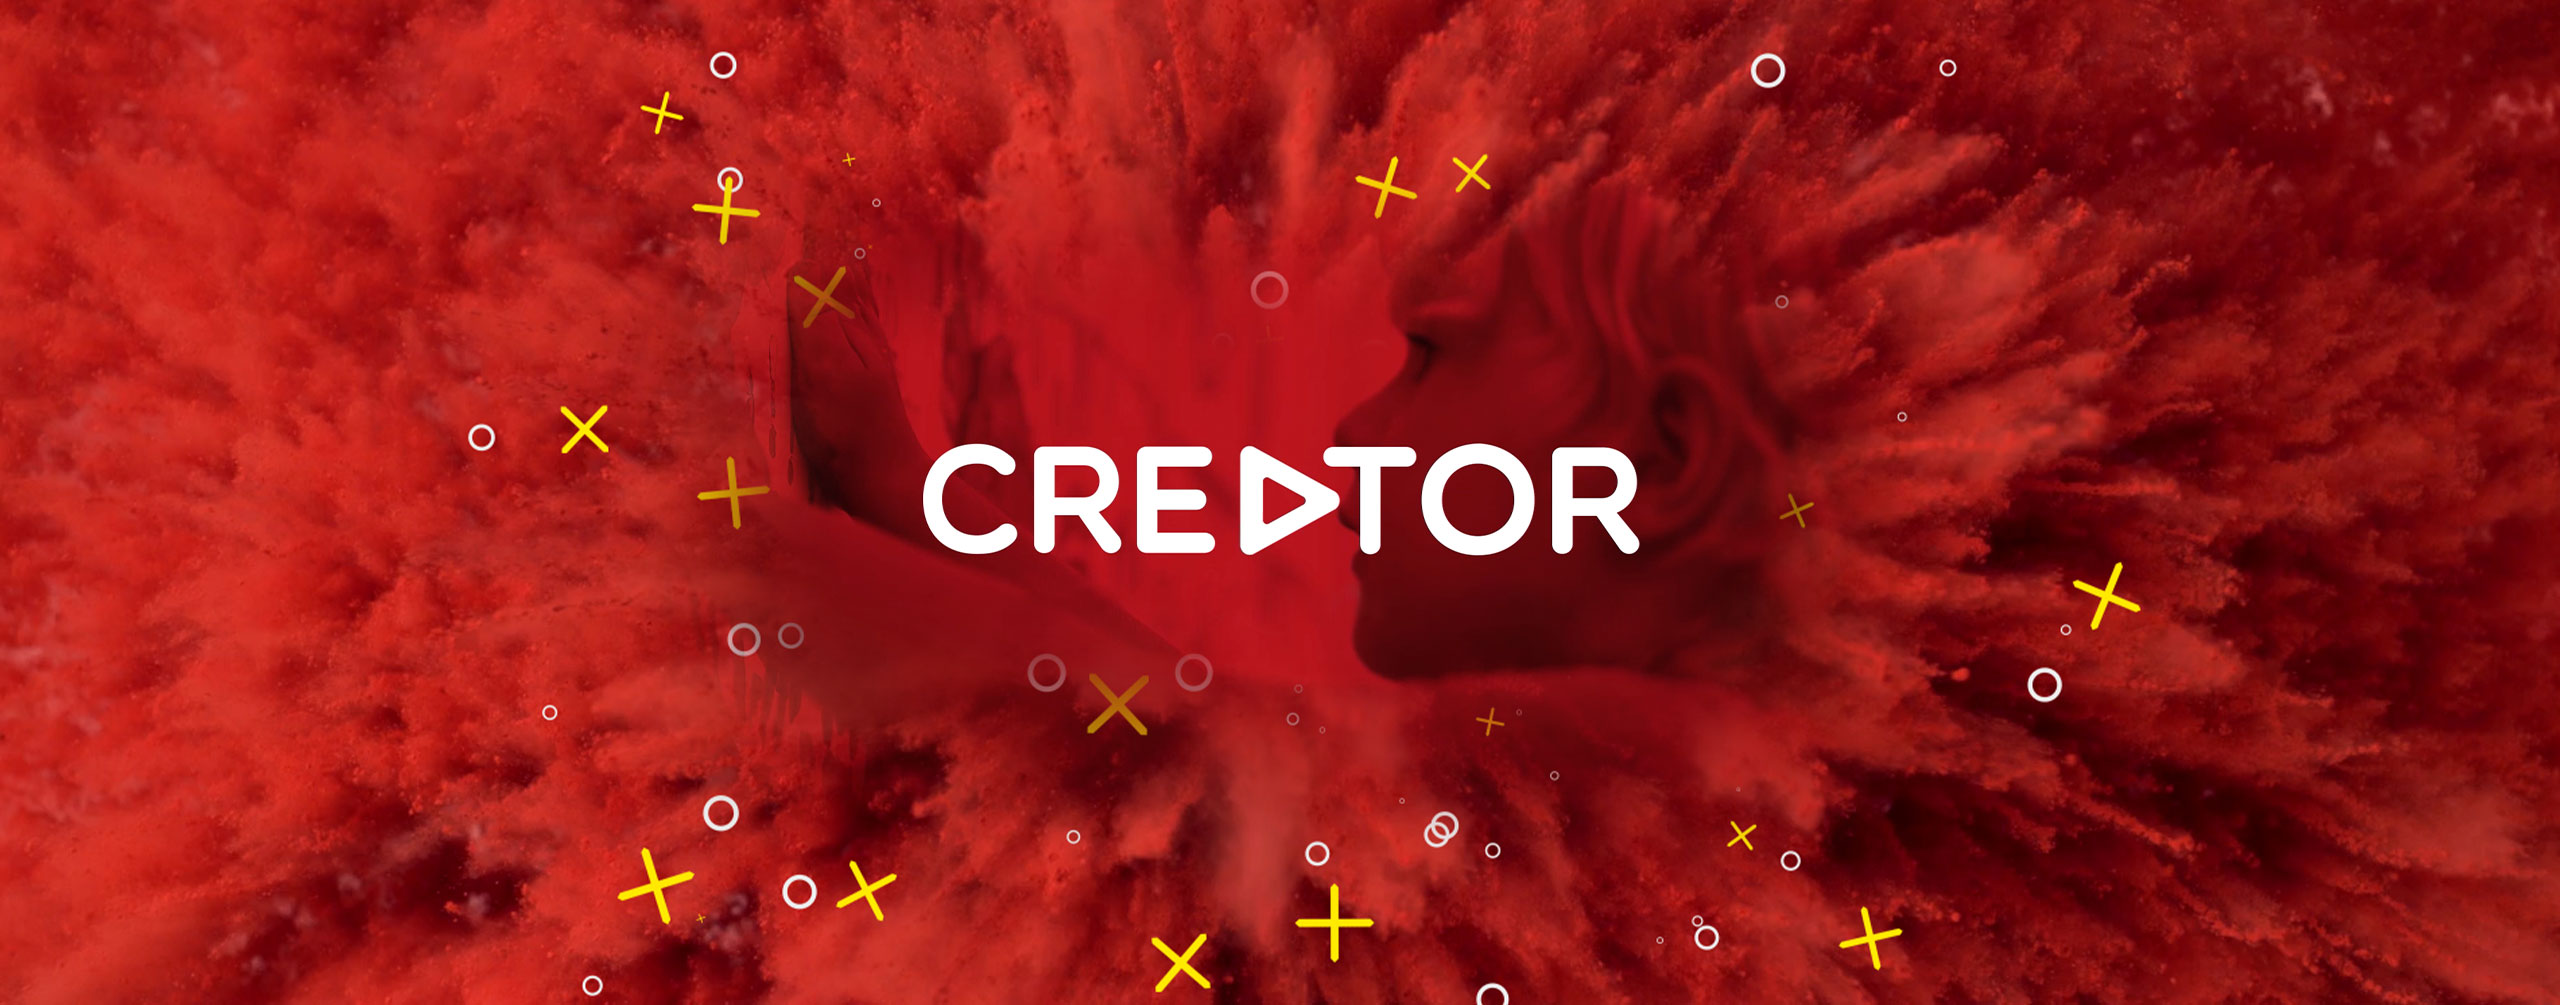 Creator - Elements for Vloggers and Influencers